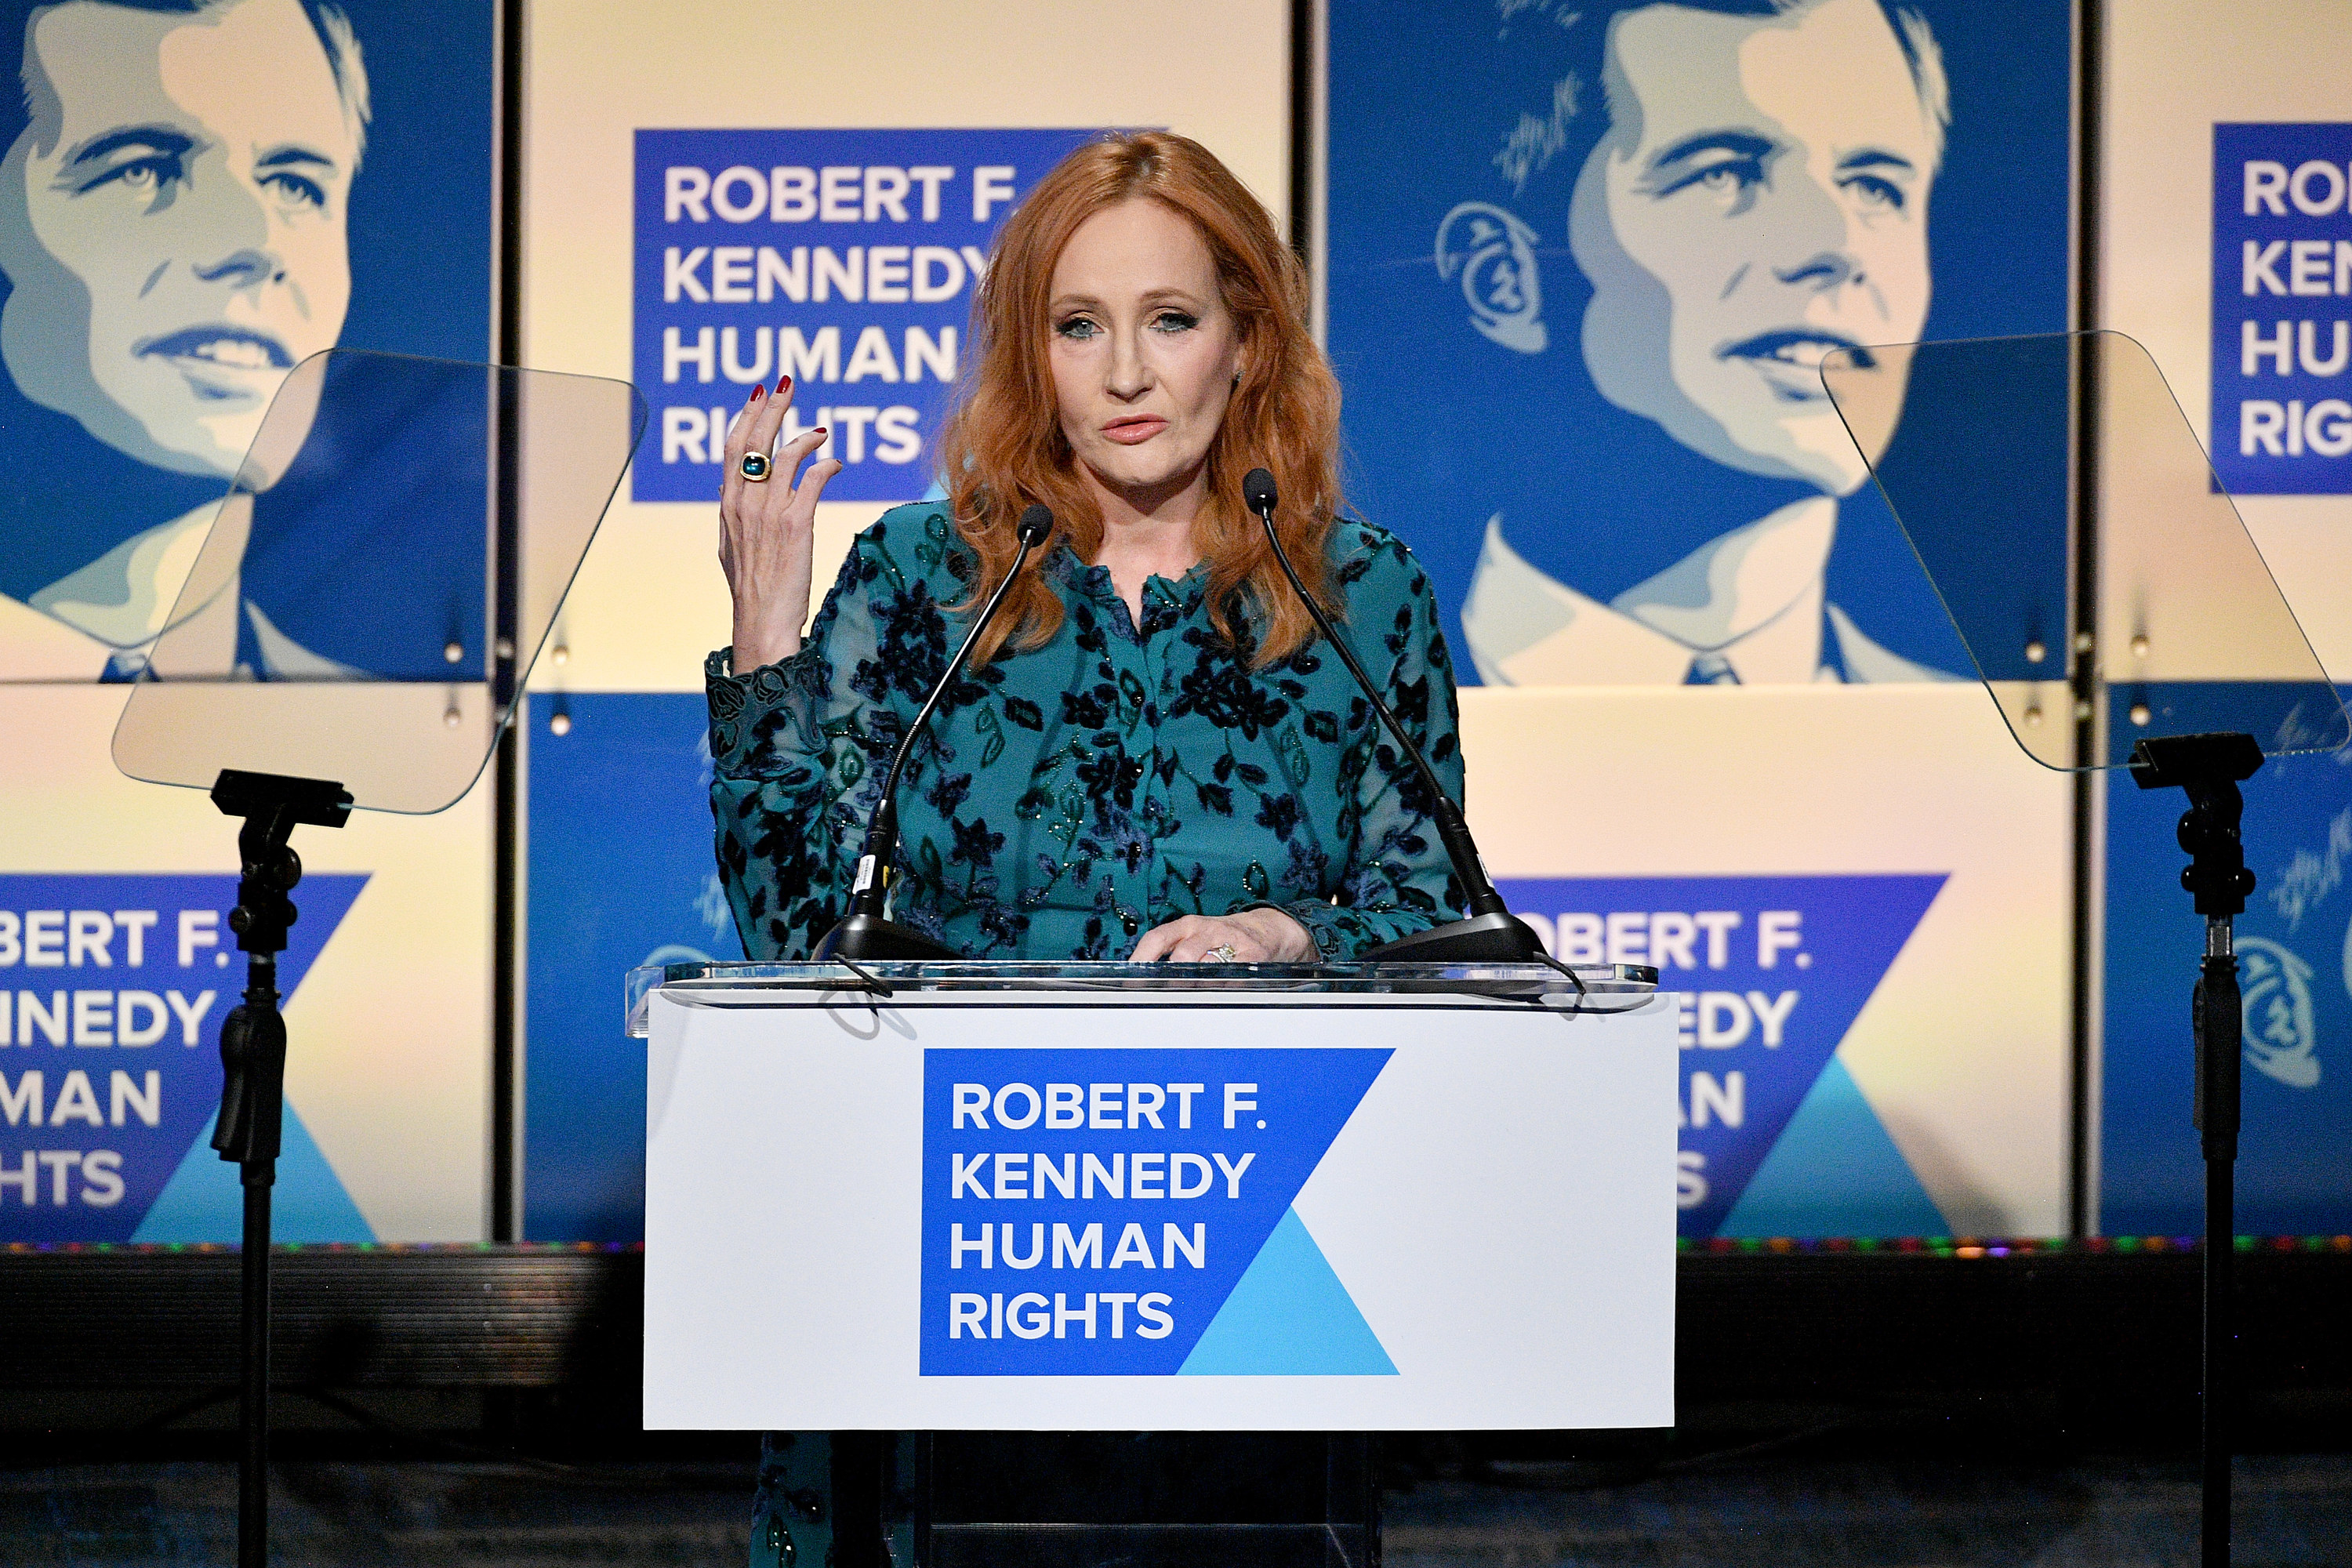 J.K. Rowling at a podium at the Robert F. Kennedy Human Rights conference